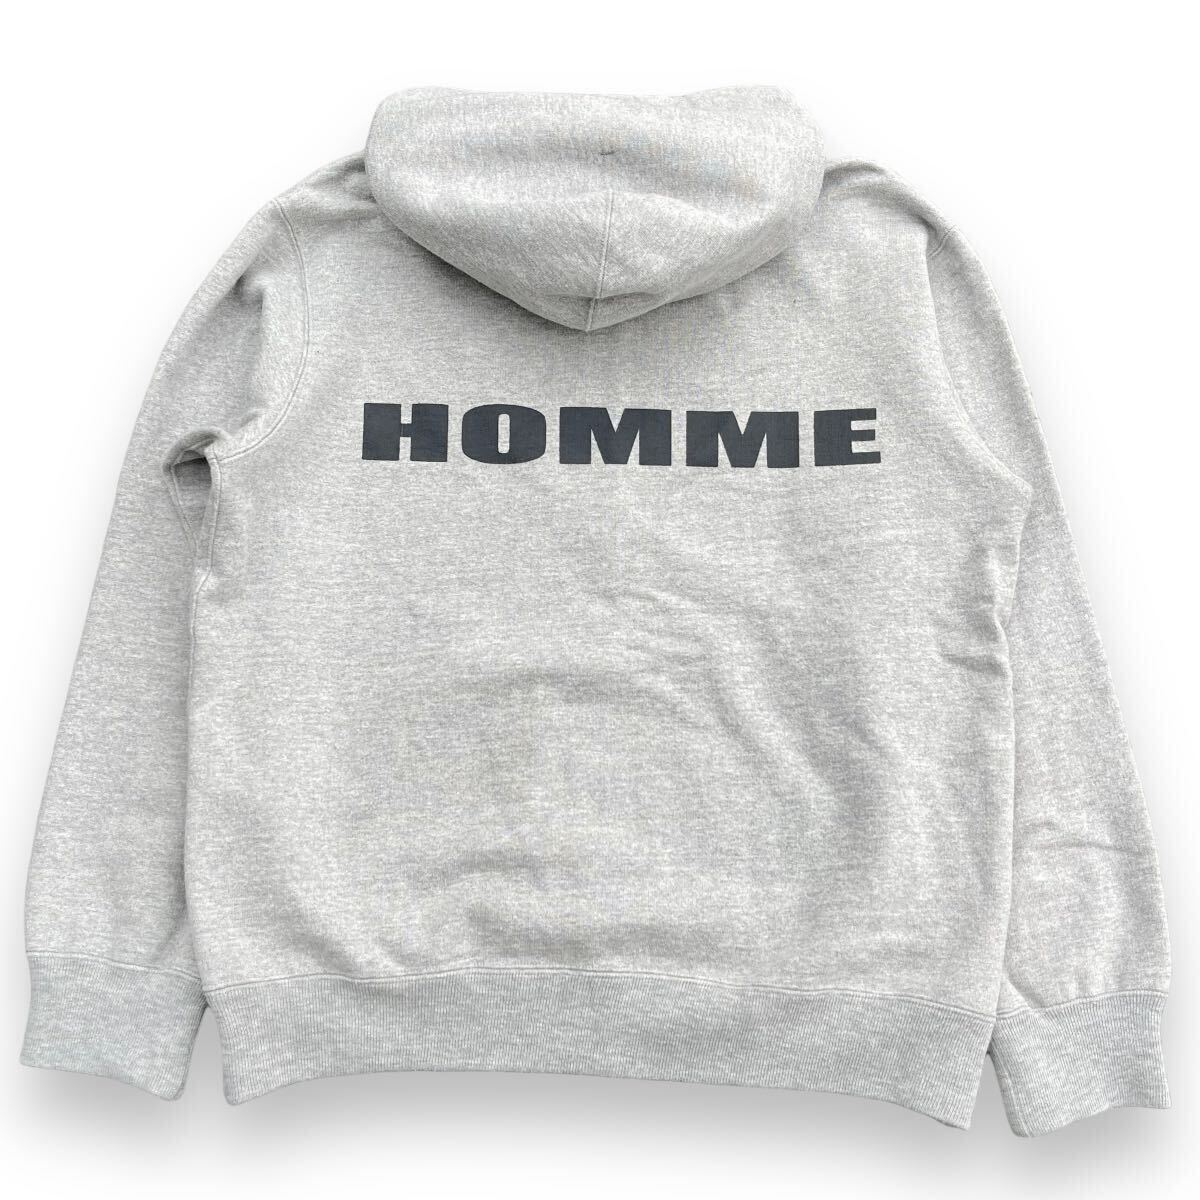 AD 2017 Japanese label comme des garons homme cdg Rei Kawakubo collection archive logo hoodie gray over sizeの画像1